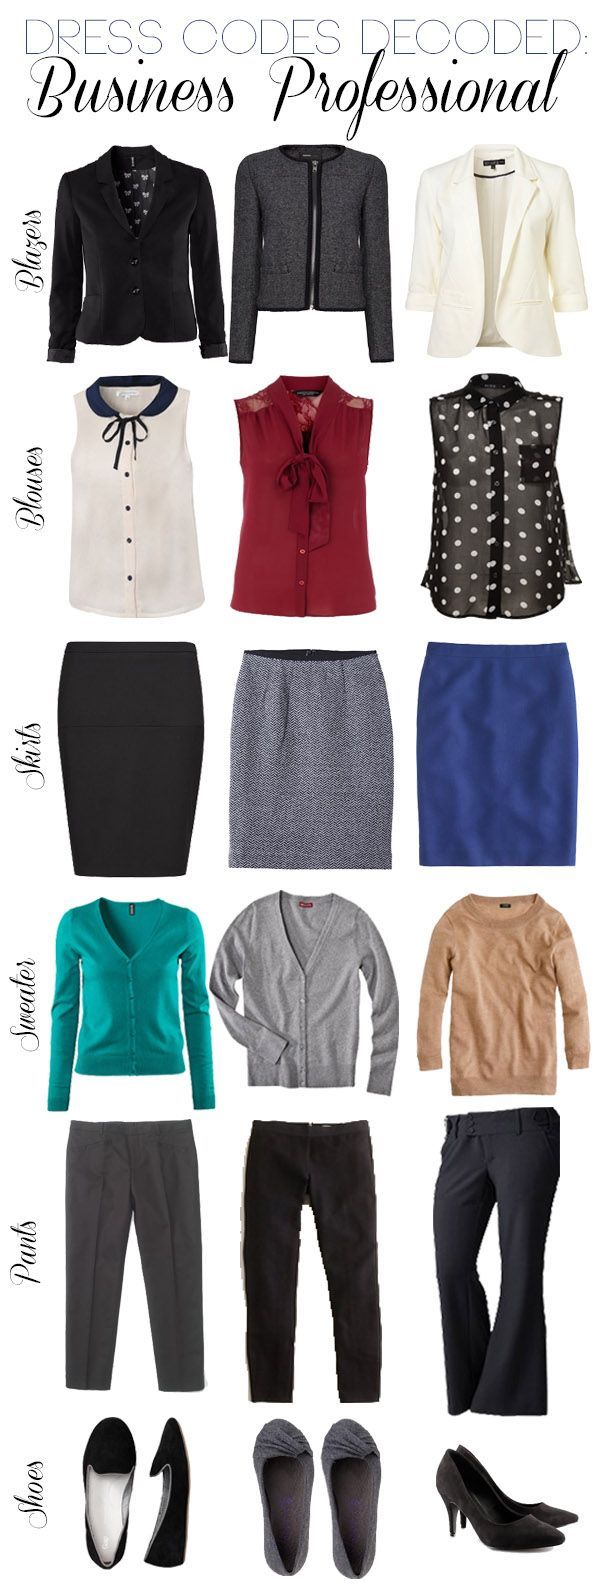 Business Professional clothing to mix s affordable & stylish! –Trying to build my professional wardrobe.